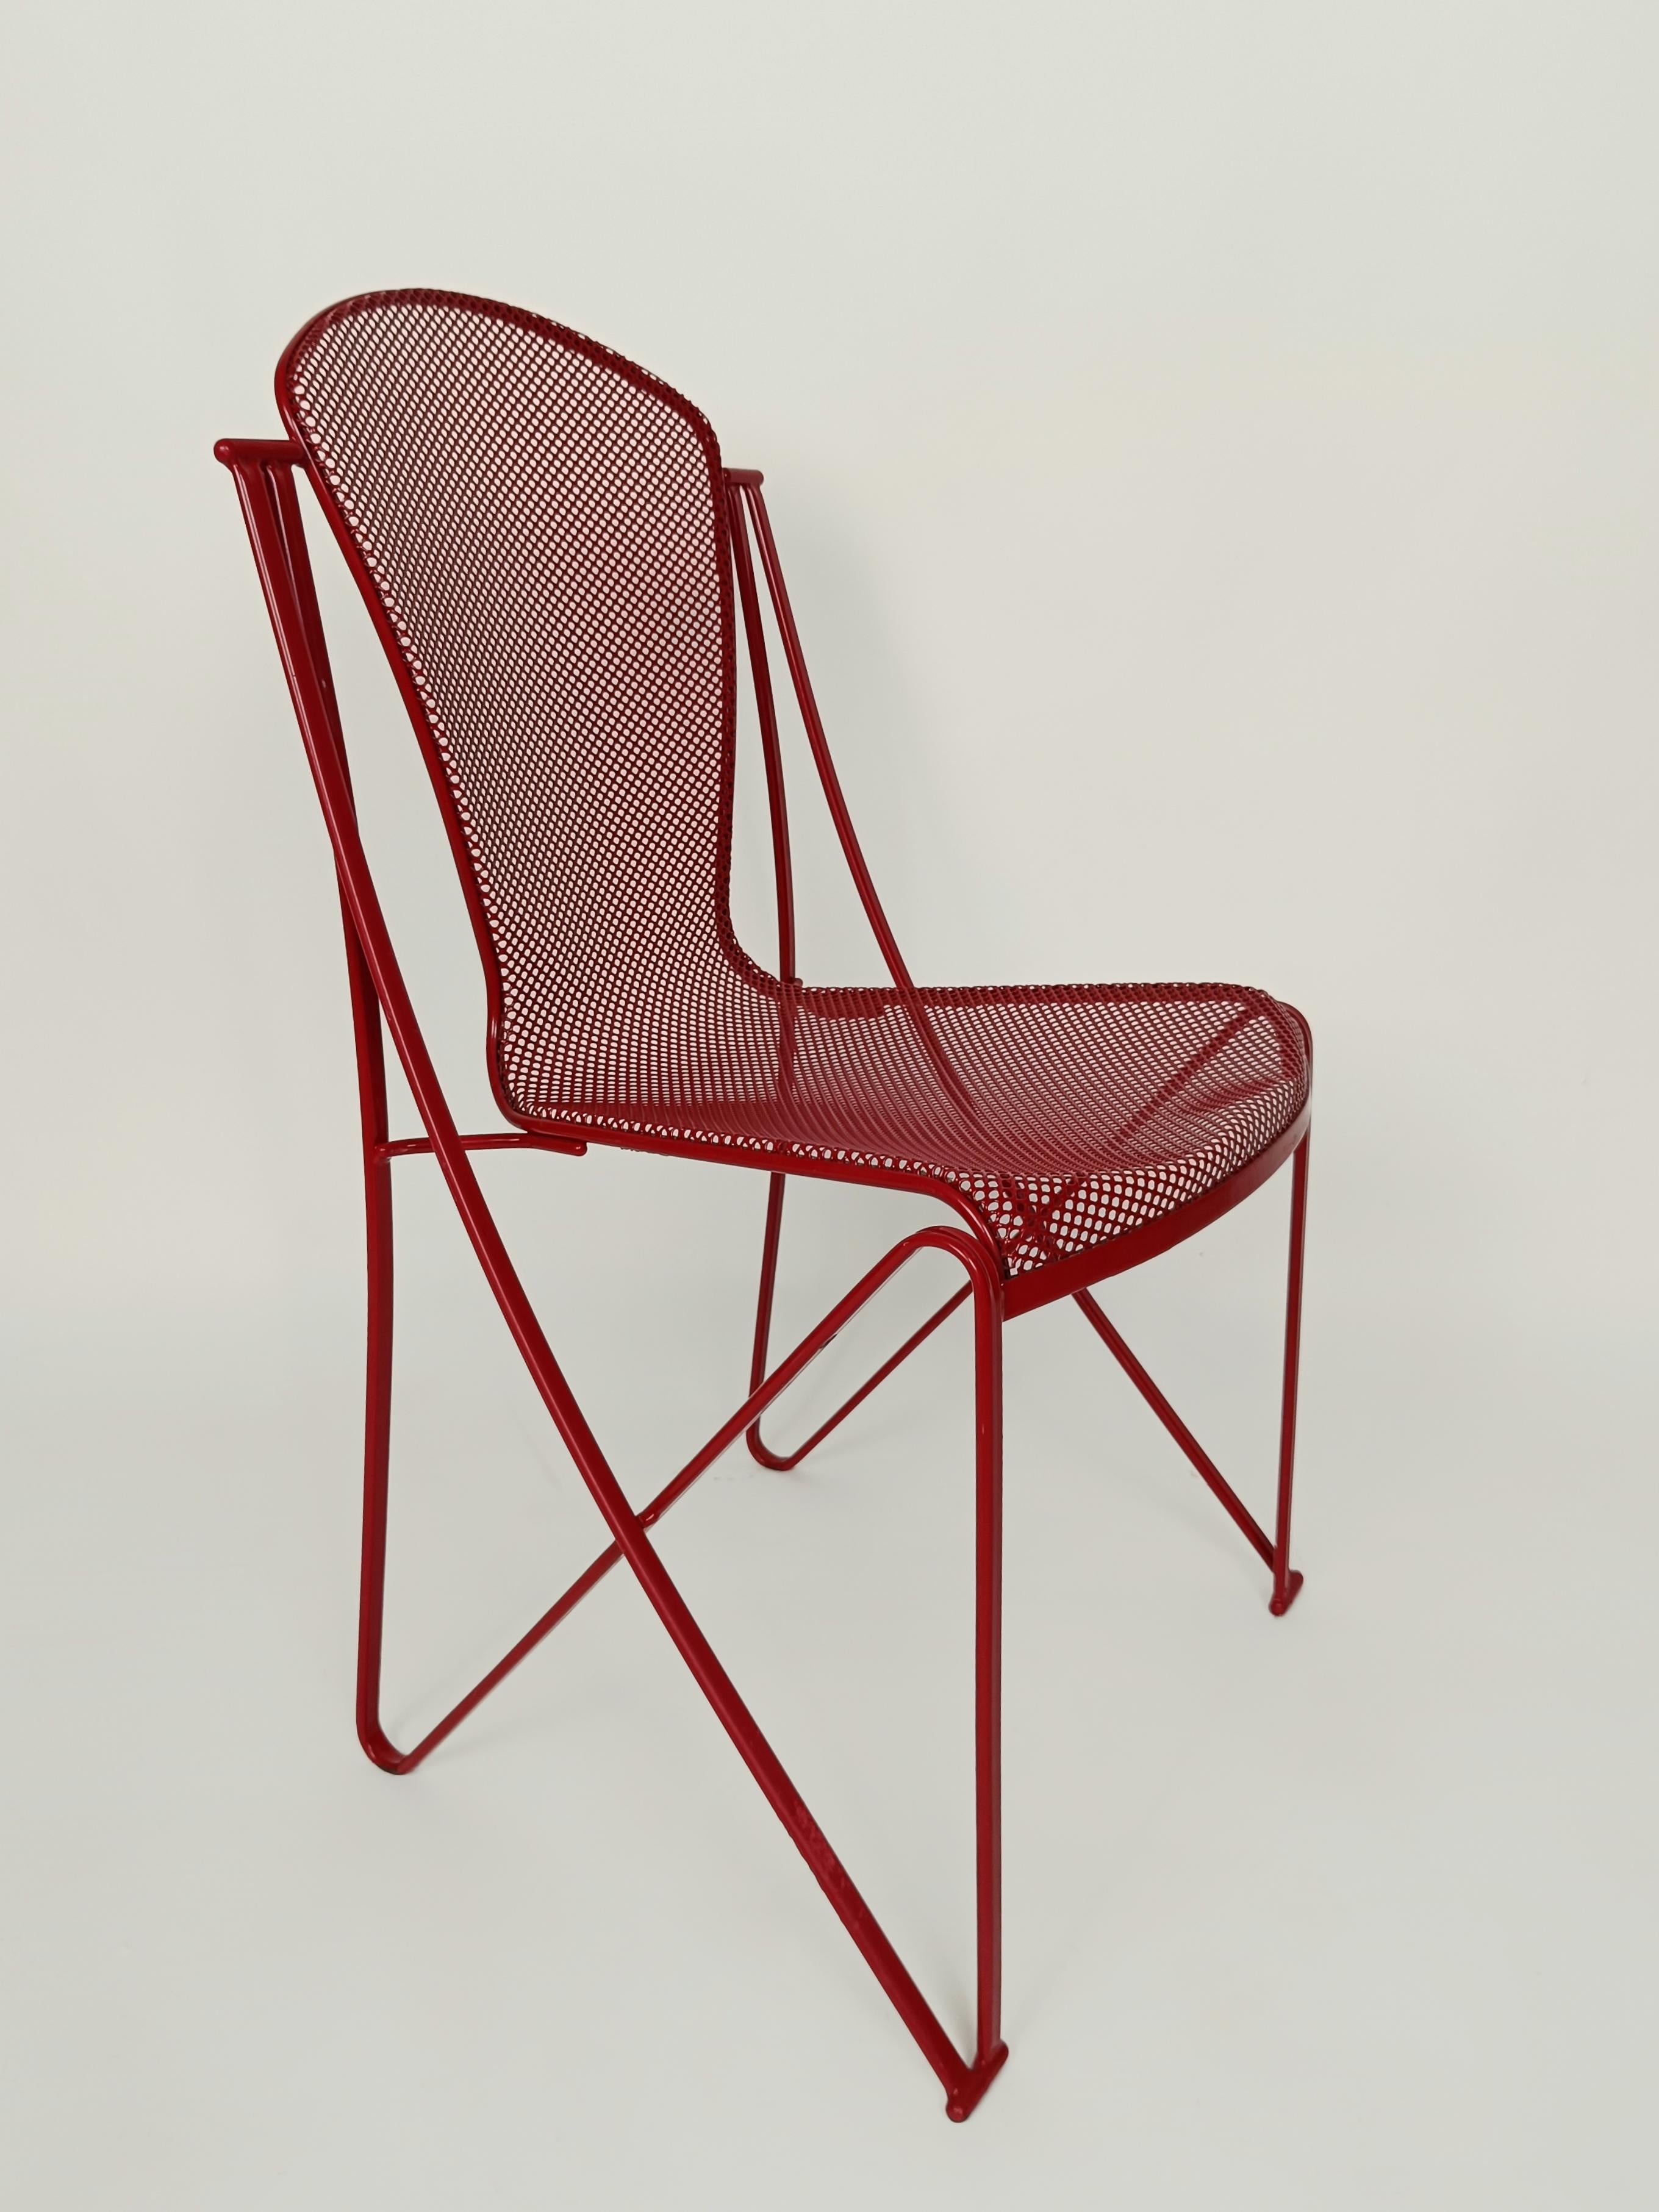 A set of Very Rare and out of production 80s chairs designed by Oscar Tusquets Blanca for Aleph-Driade, an historic Italian company in the world of design.
Conceived as an outdoor chair, it was important that it should stand up to bad weather and